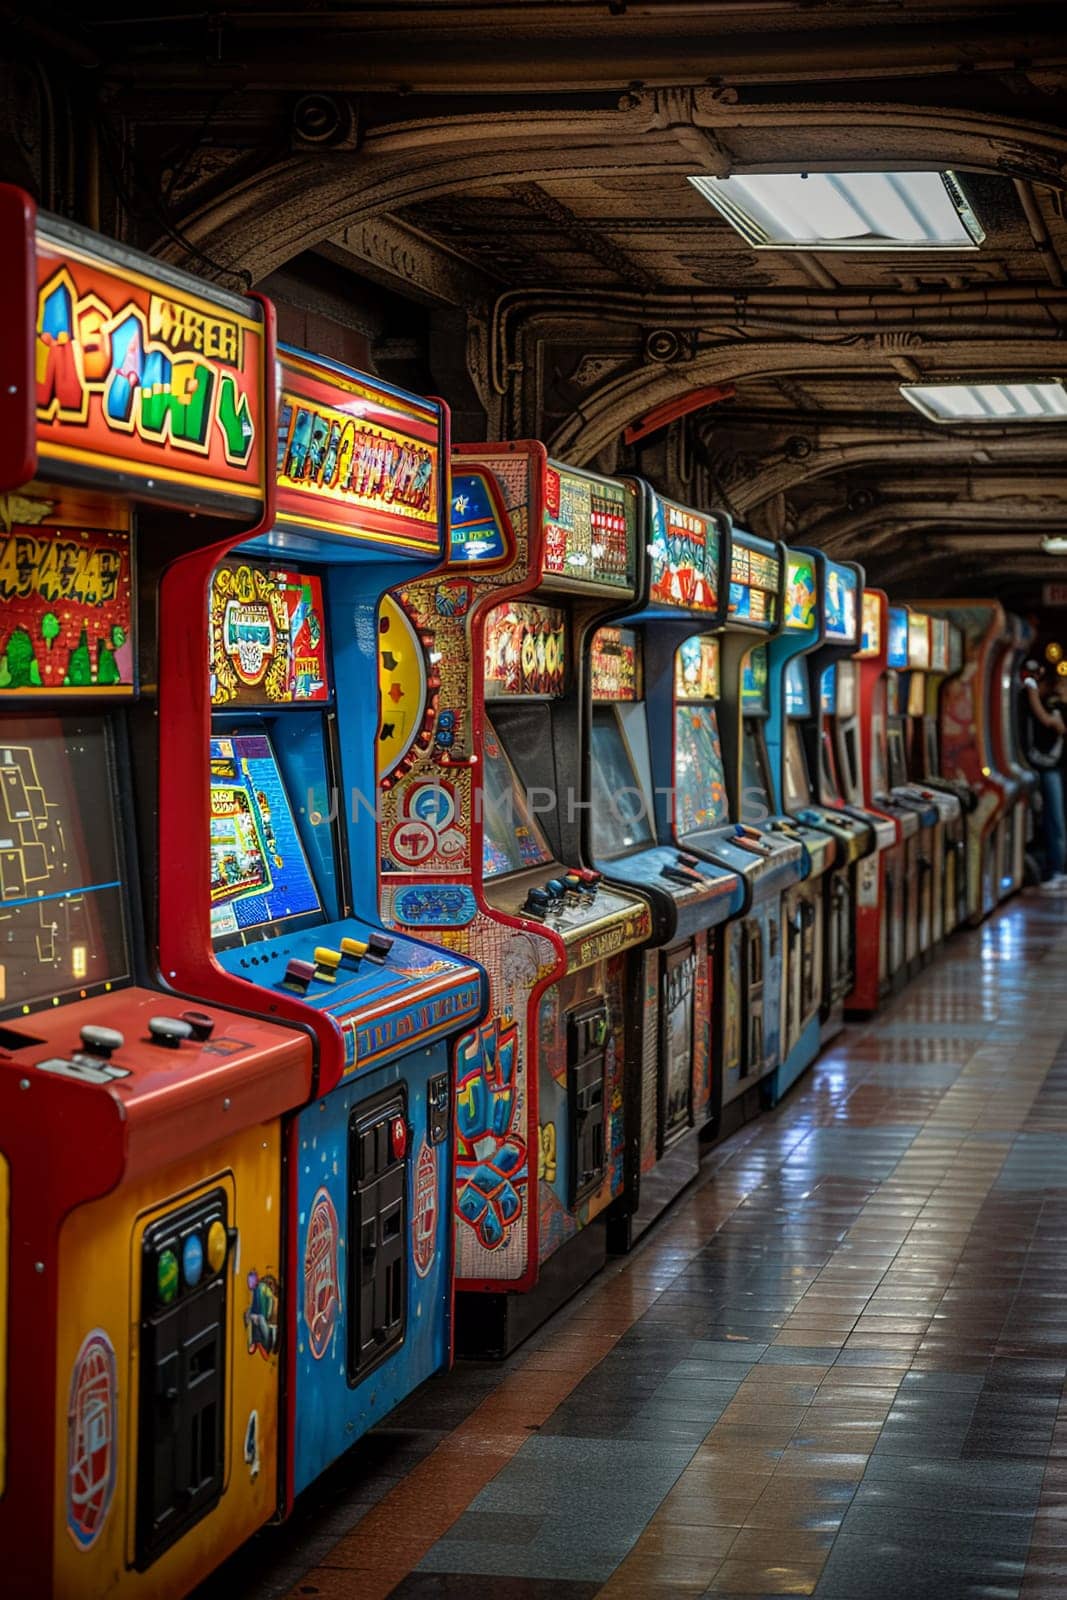 Classic Arcade Machines Replay Childhood in Business of Nostalgic Gaming by Benzoix